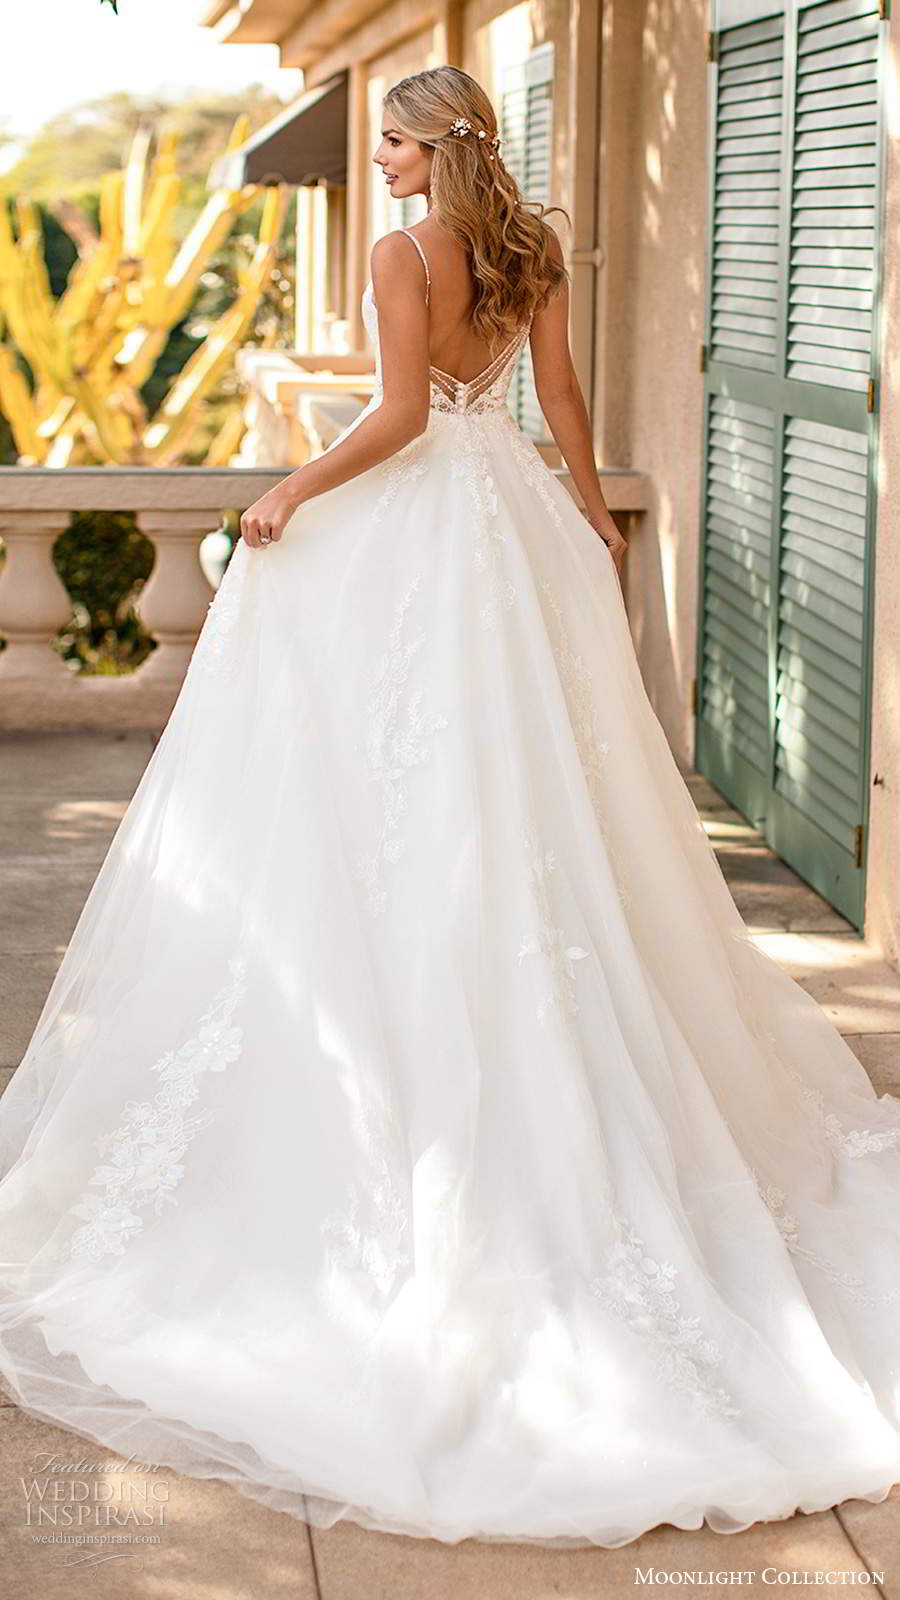 moonlight collection fall 2020 bridal sleeveless beaded straps v neckline embellished bodice a line ball gown wedding dress chapel train (11) bv